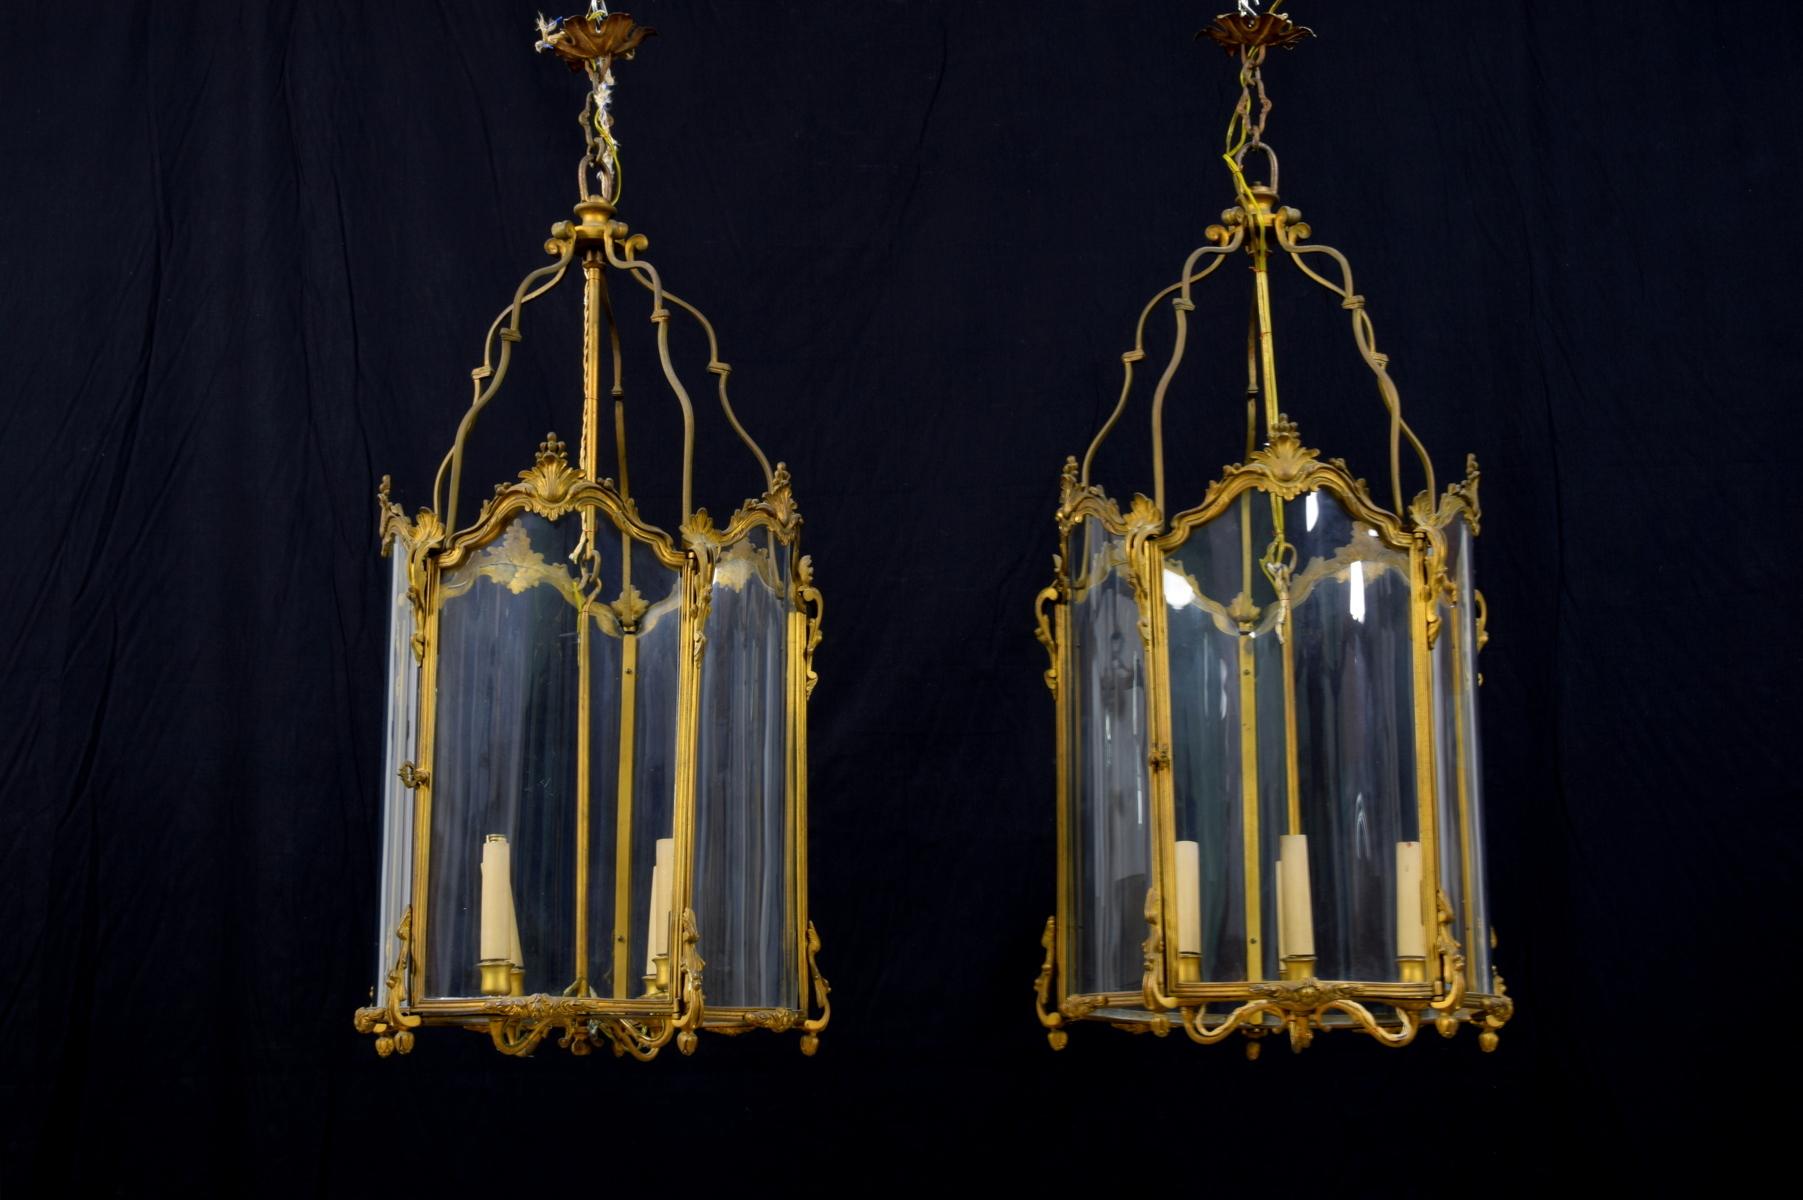 Pair of French gilt bronze and shaped glass lanterns with four lights
End of 19th century. Louis XV style.

The pair of lanterns was made at the end of the 19th century in Louis XV style, French. They have a round shape in bronze finely chiselled